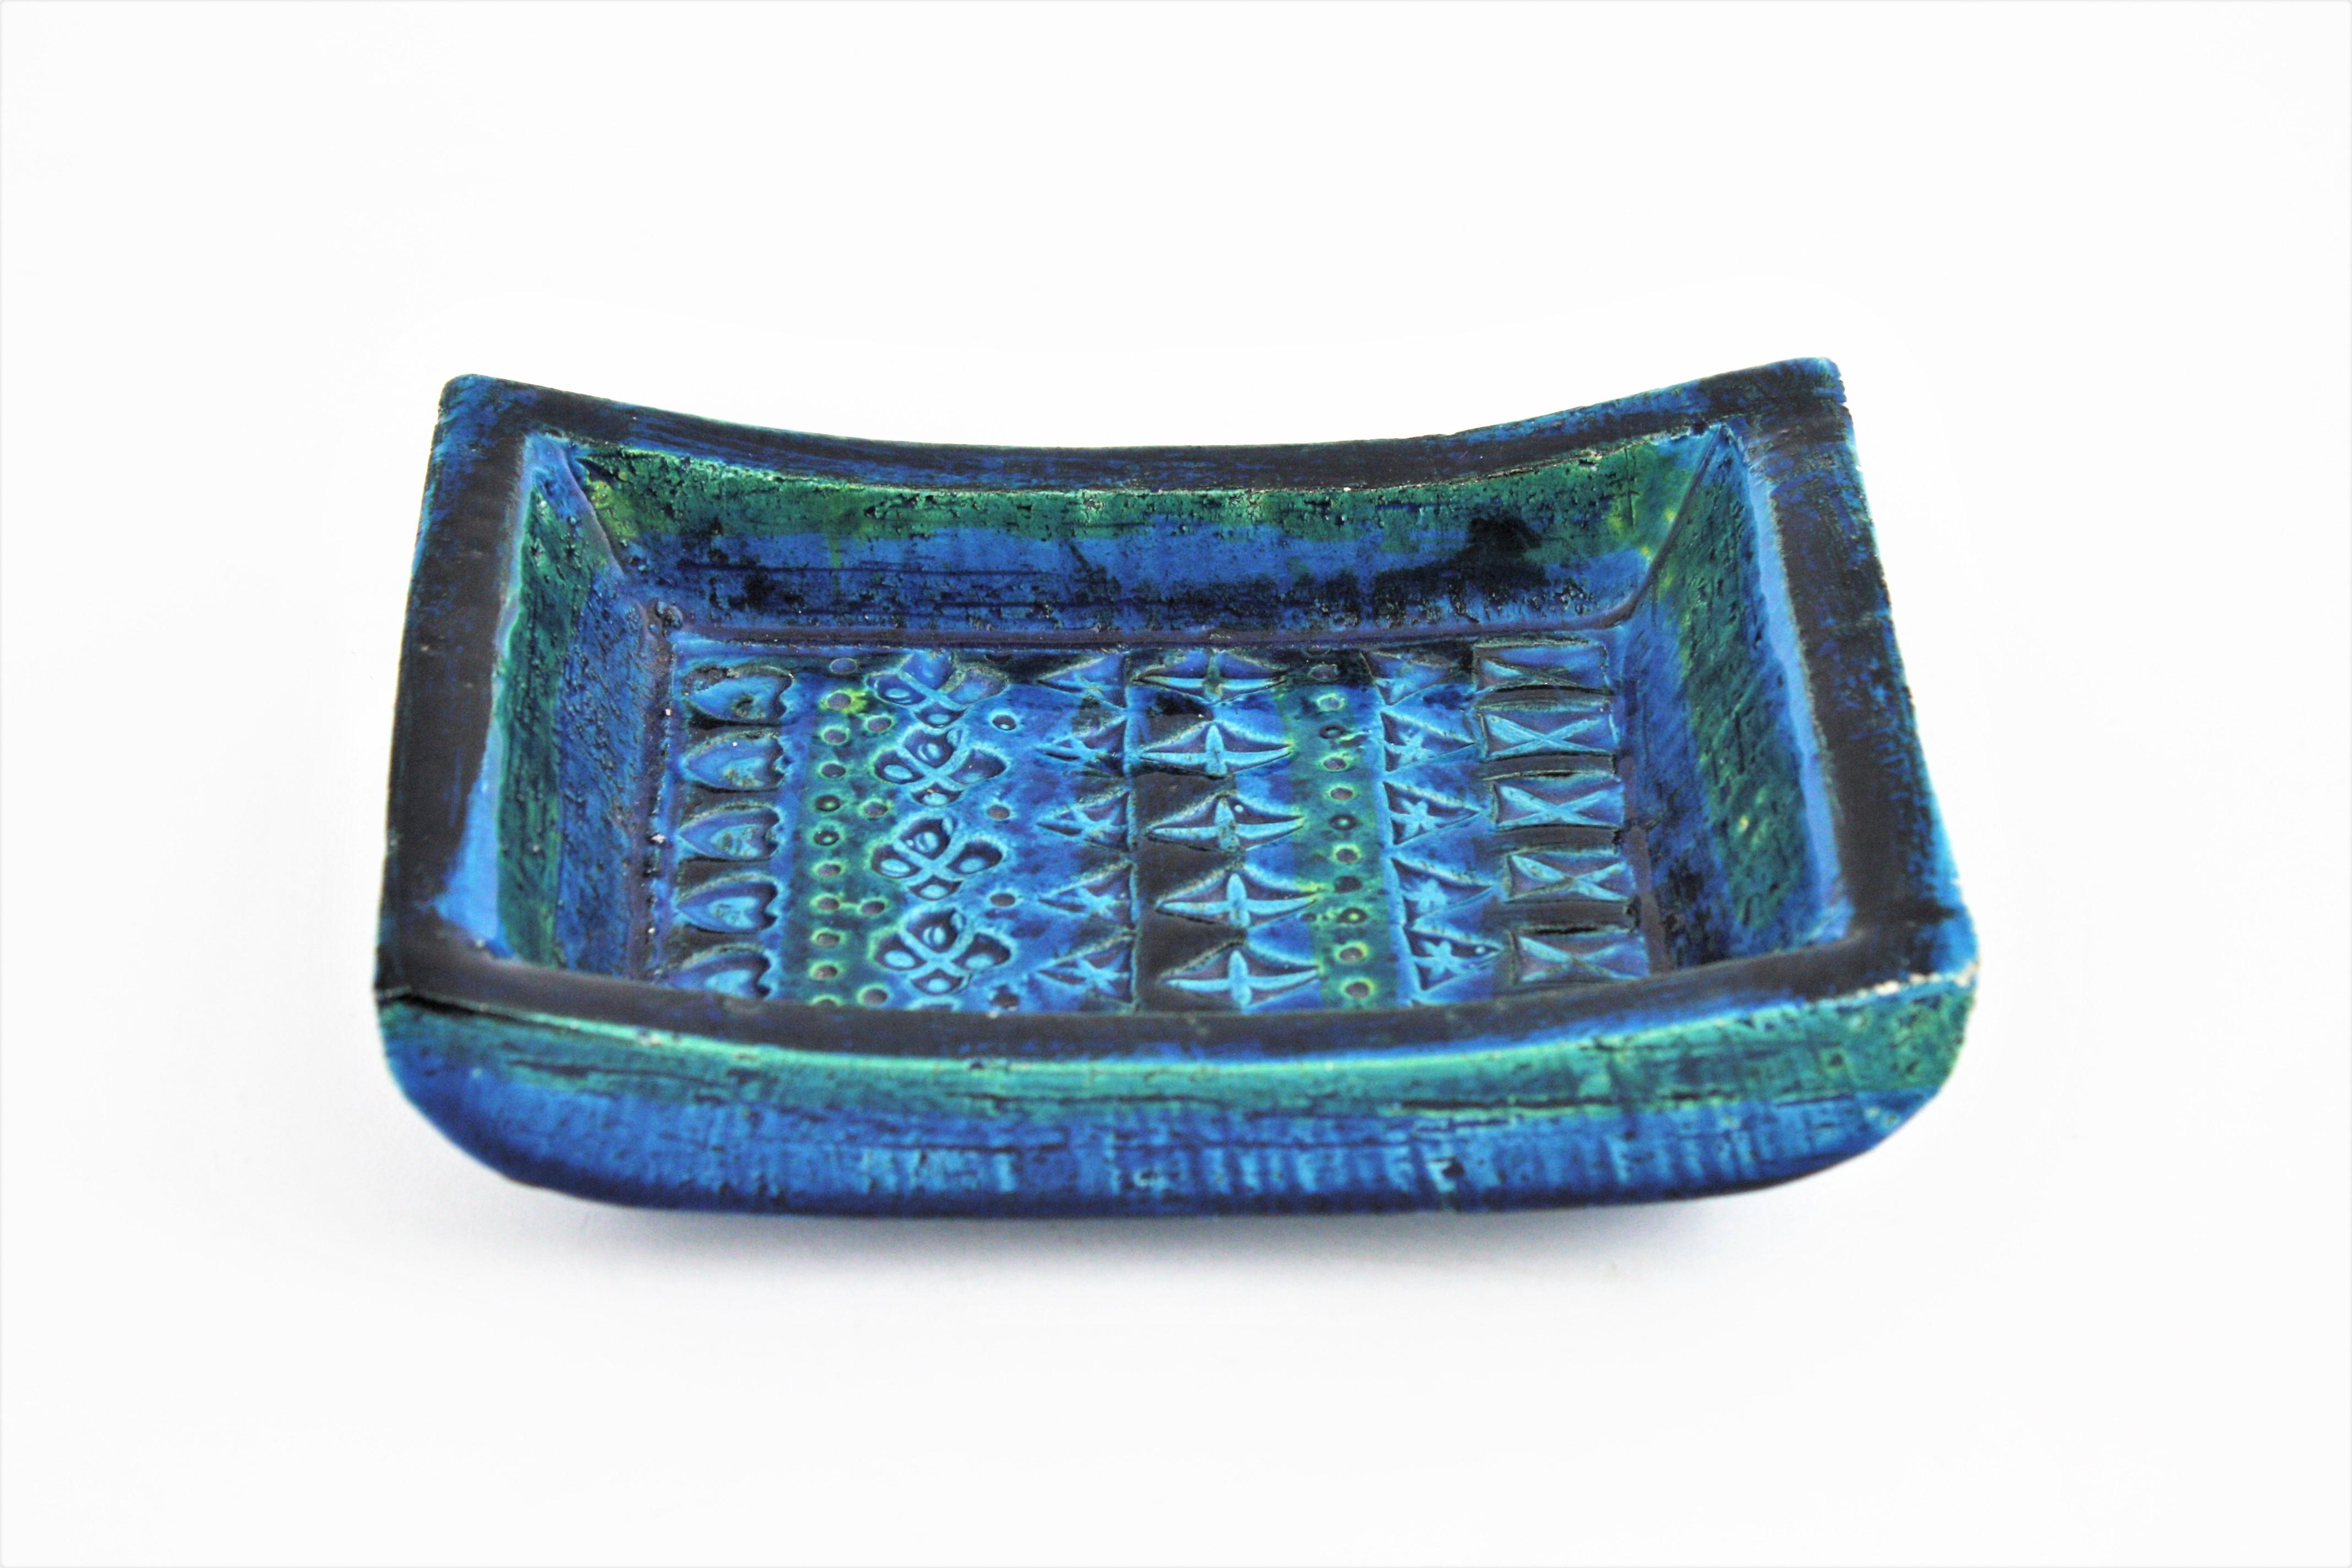 Italian handcrafted blue glazed ceramic rectangular bowl with hand-carved geometric designs in cobalt blue and turquoise colors. The 'Rimini blu' collection was designed by Aldo Londi for Bitossi. Italy, 1960s.
Lovely to be used as bowl, vide-poche